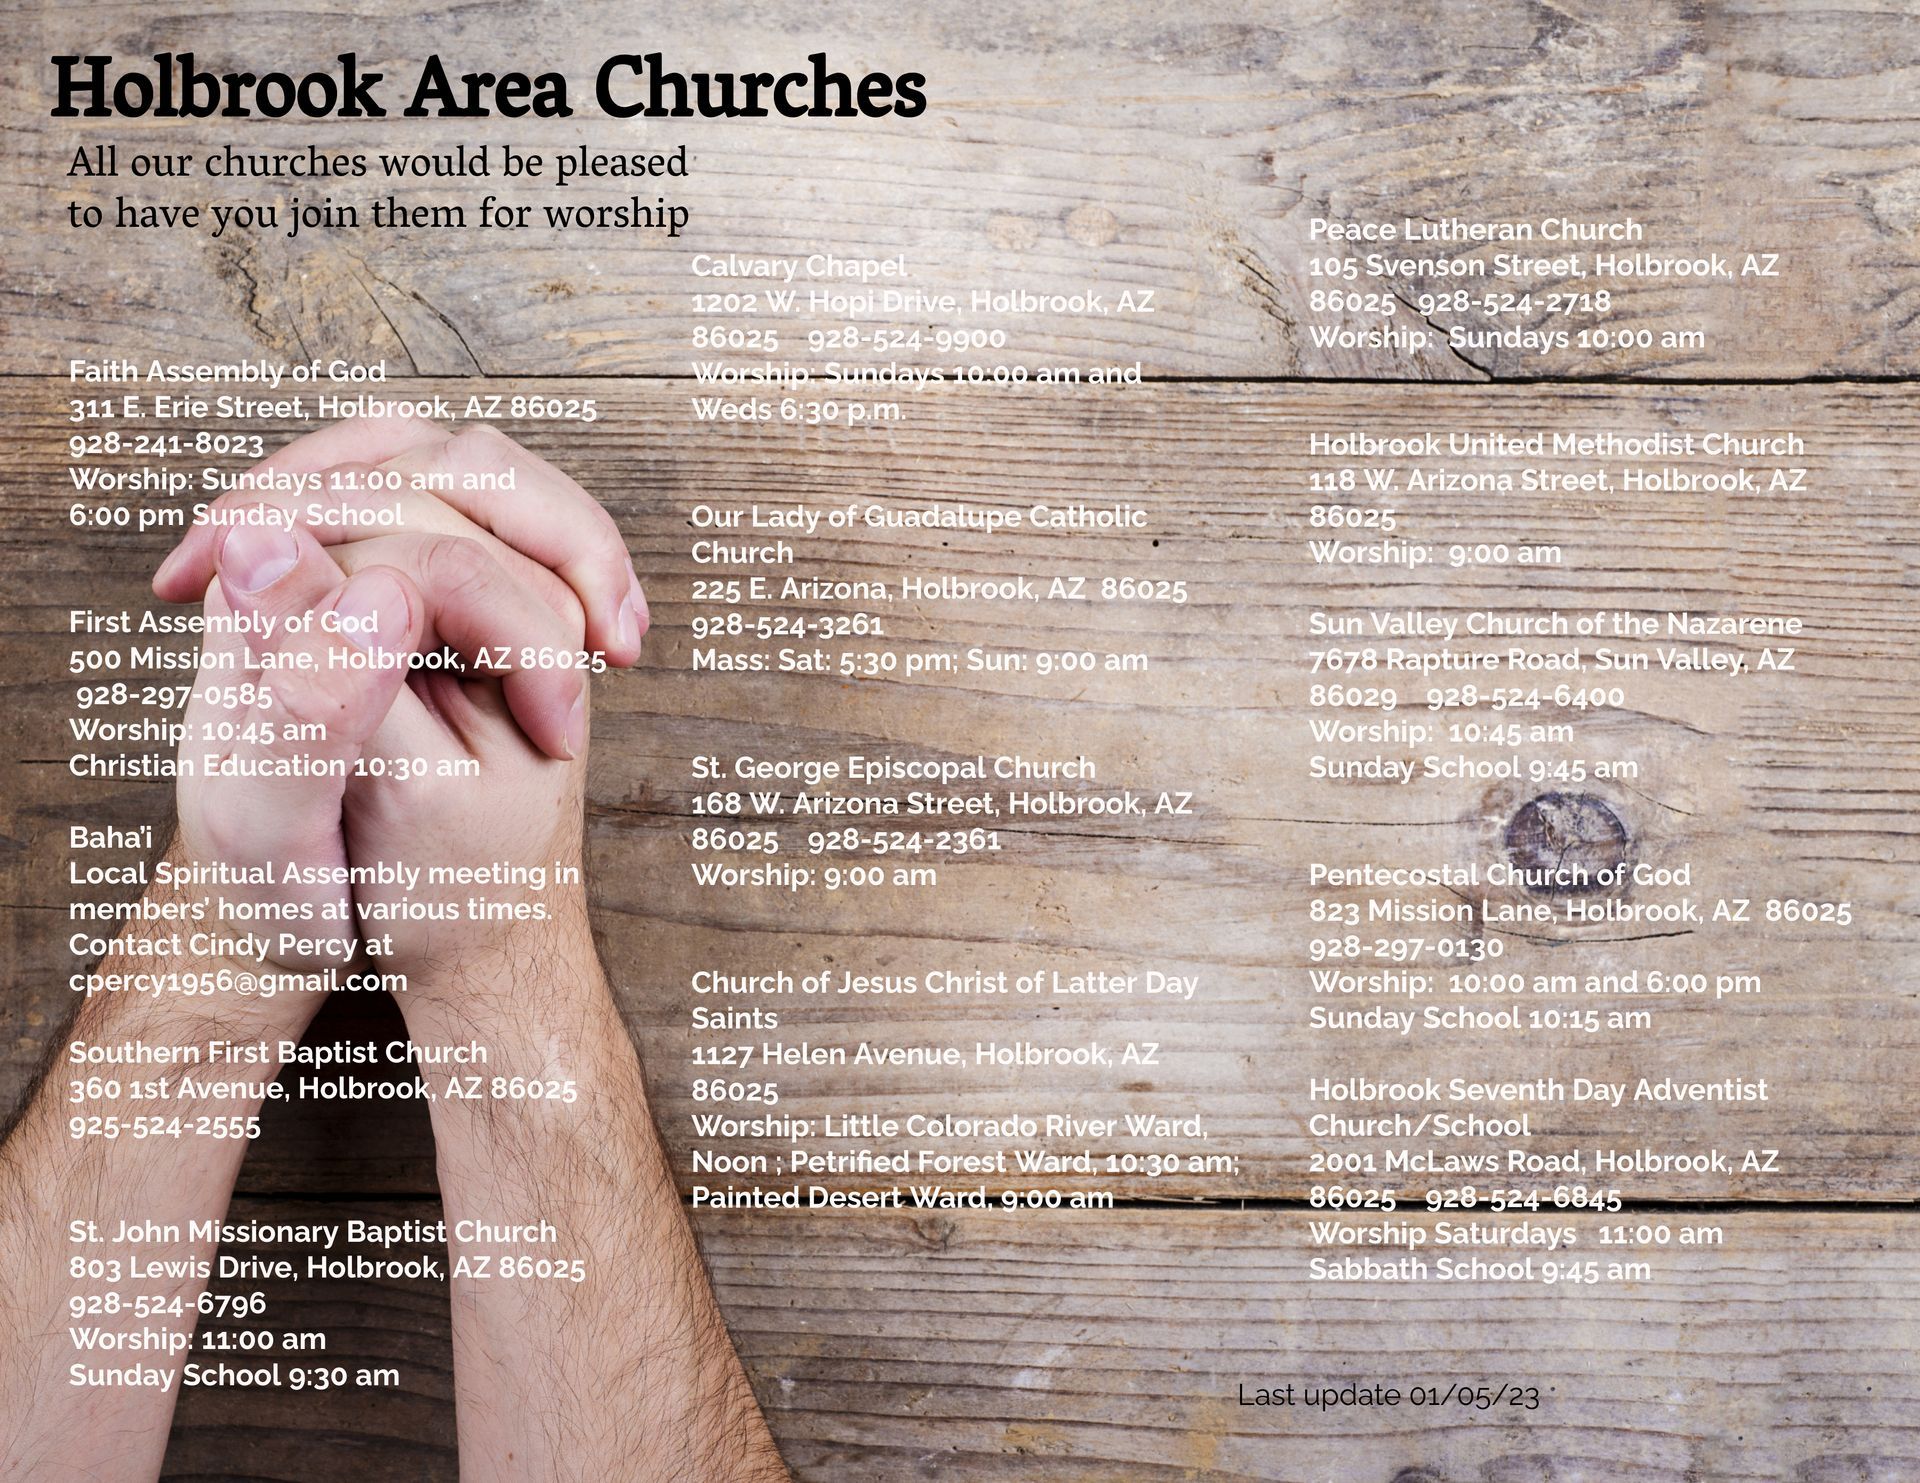 A brochure for holbrook area churches shows a man praying